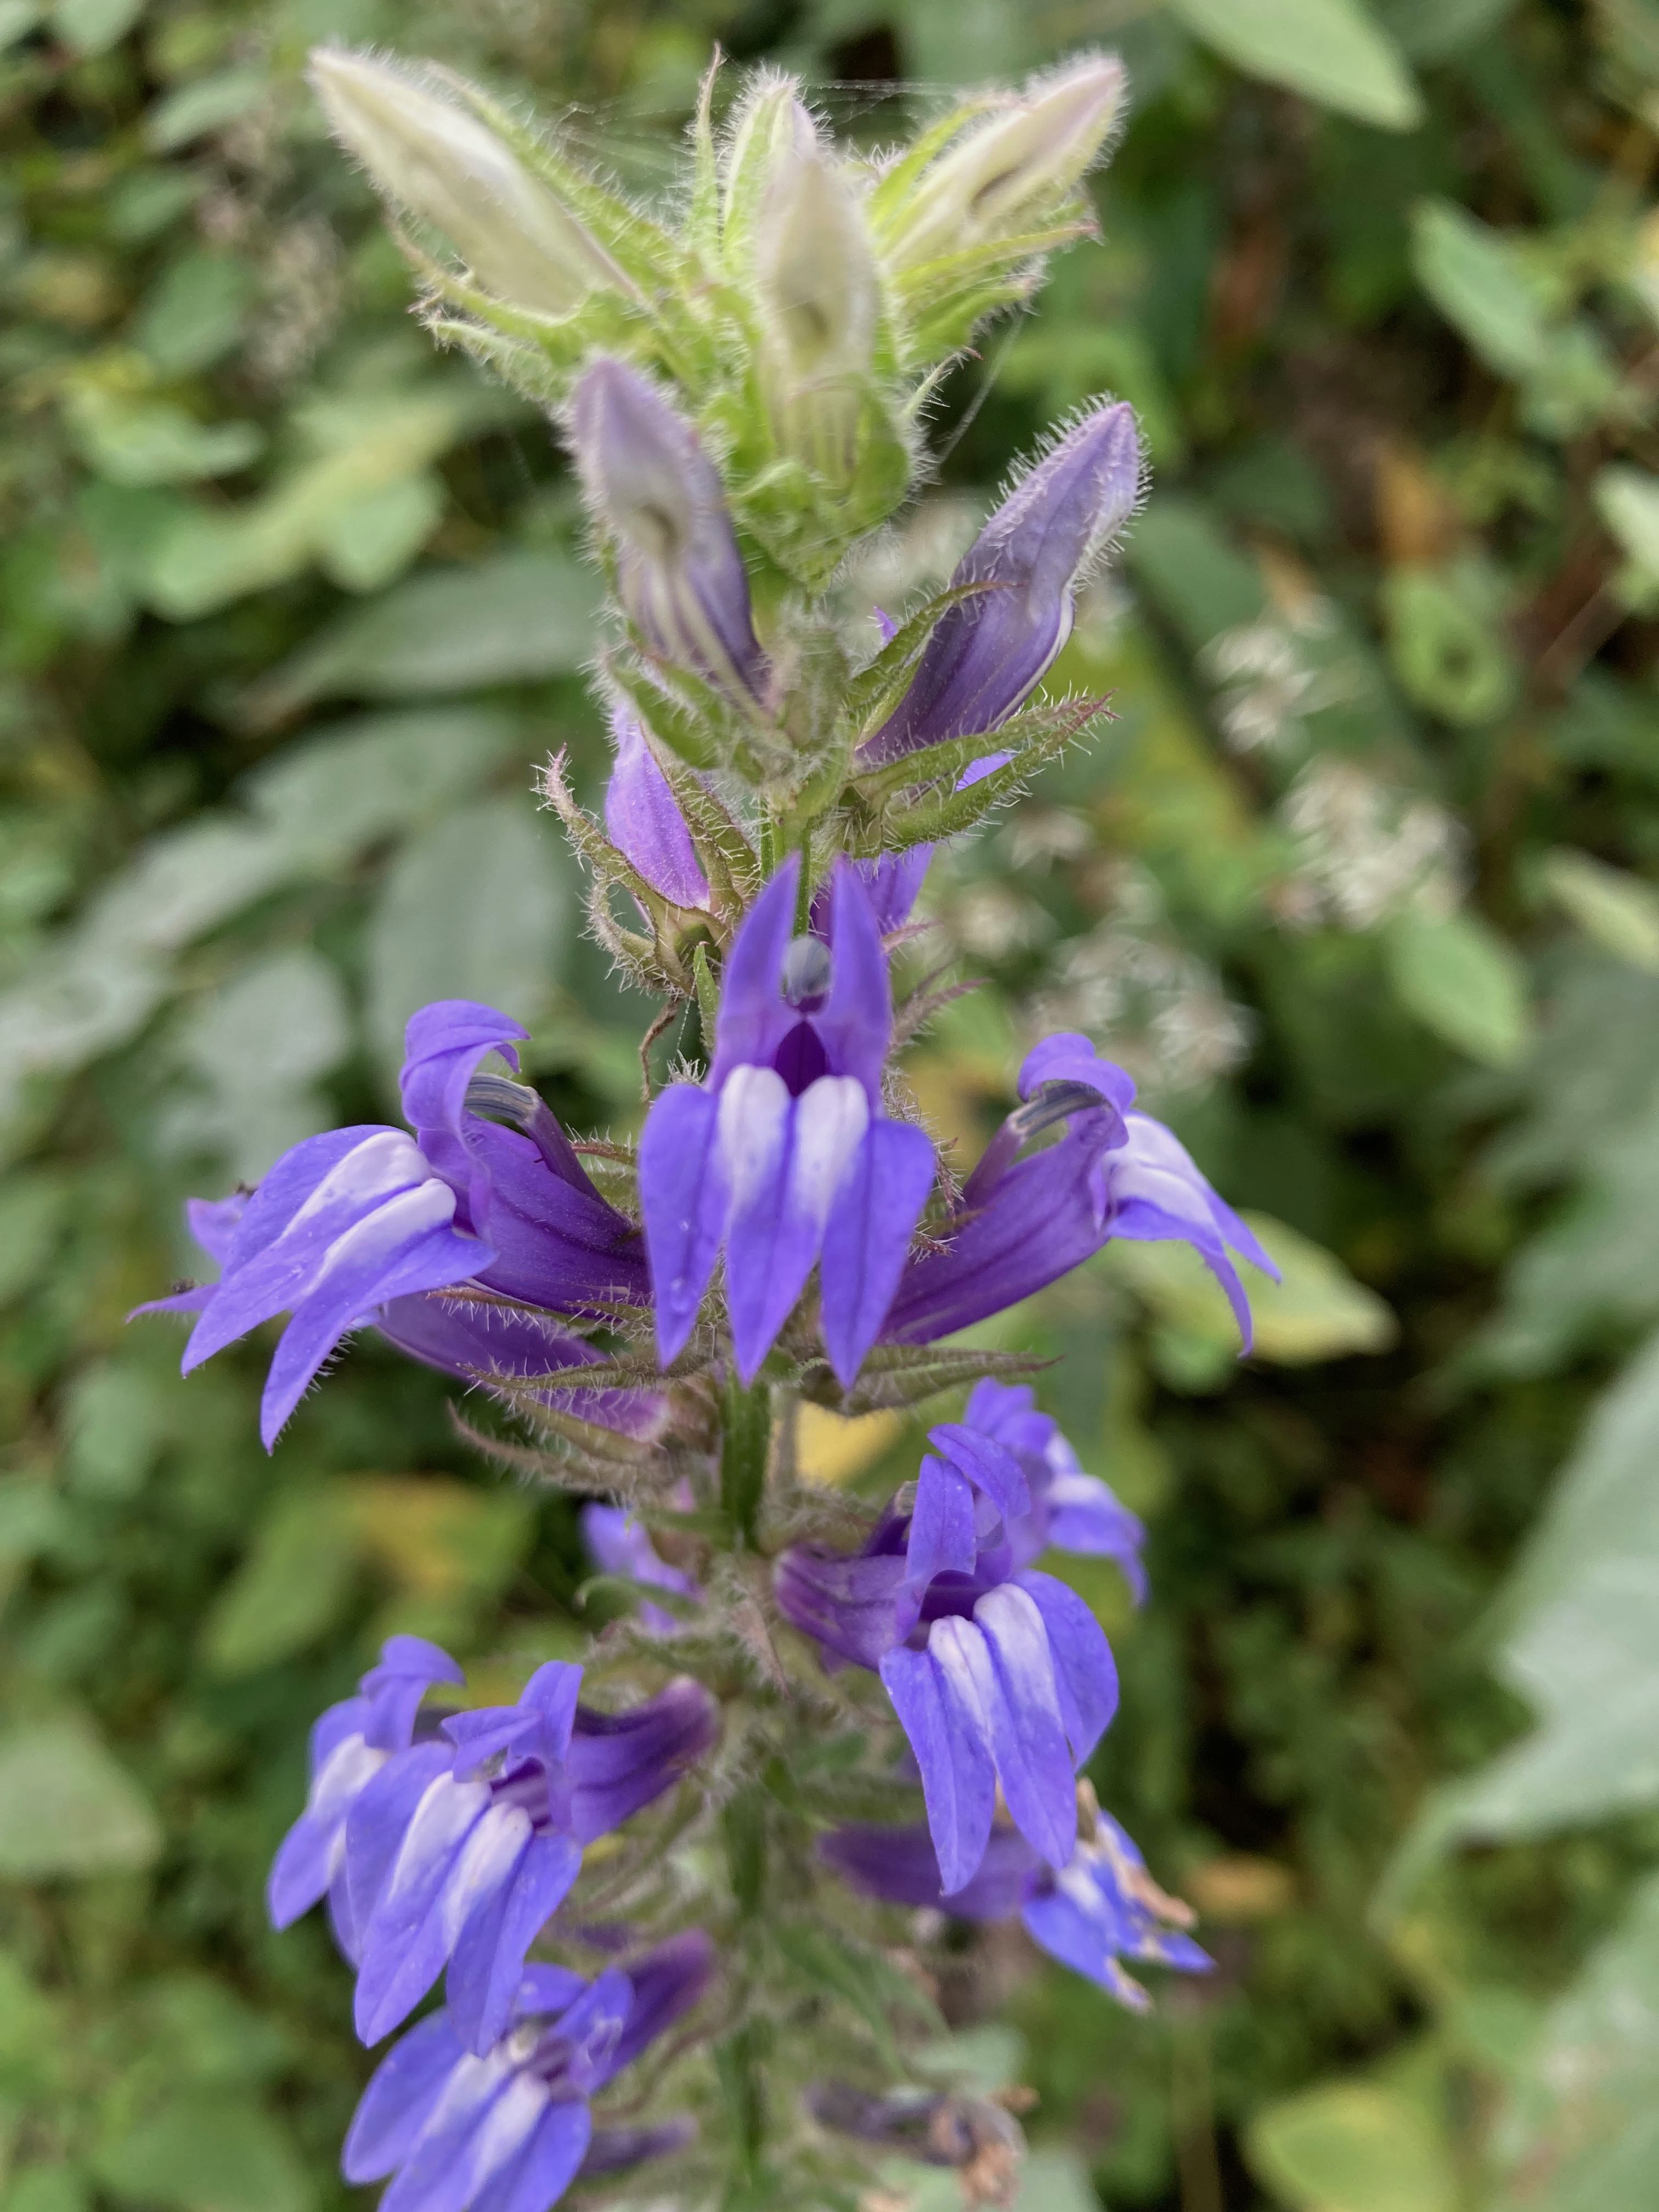 The Scientific Name is Lobelia siphilitica. You will likely hear them called Great Blue Lobelia. This picture shows the Close-up of the tubular, 2-lipped flowers with the three lobes of the lower lip larger than the two lobes of the upper lip.  of Lobelia siphilitica